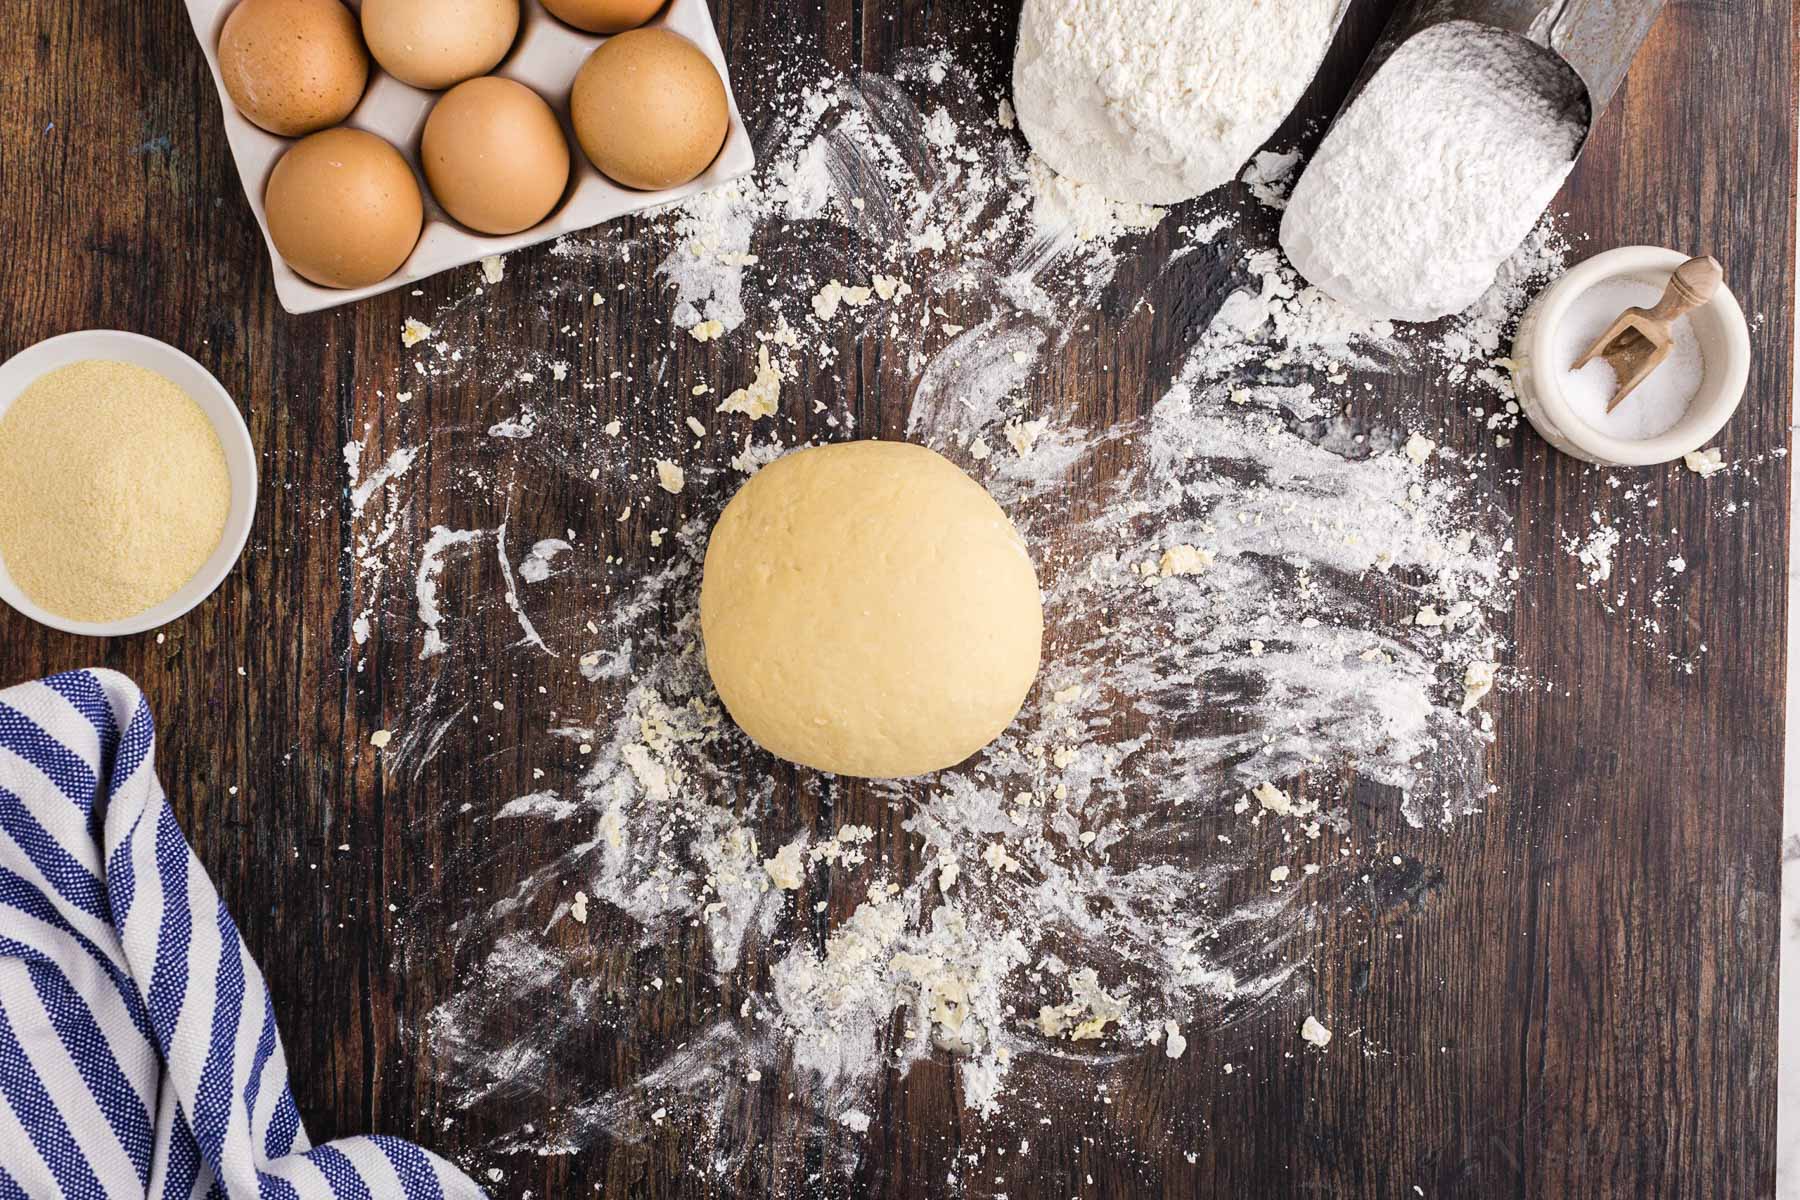 Homemade pasta dough rolled into a smooth ball on a wooden kitchen surface, bowl of semolina, striped linen, tray of eggs, small bowl of slat, measuring cups with different types of flour.